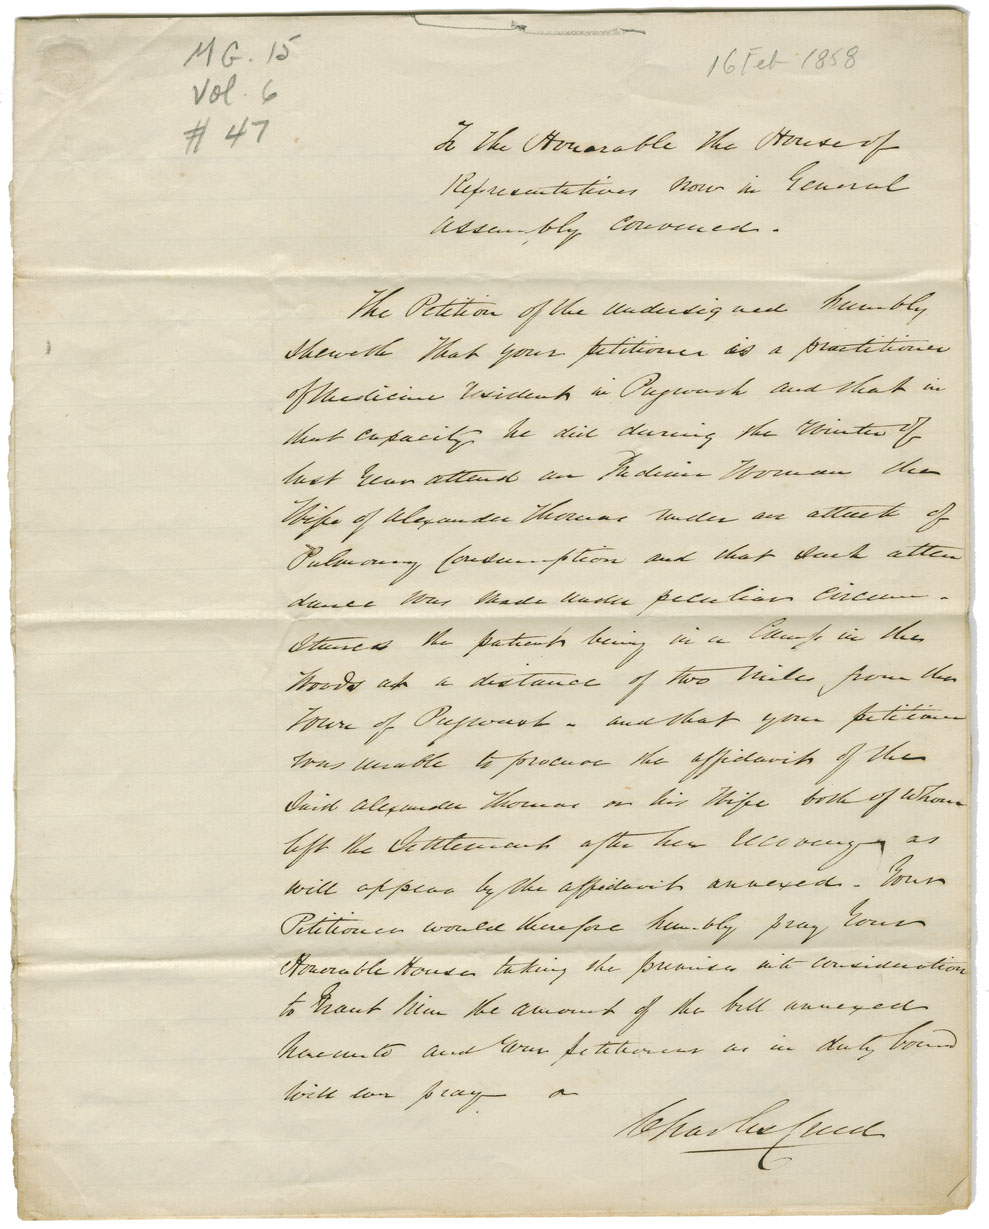 Petition of Dr. Charles Creed for money for services to Mi'kmaq, including wife of Alexander Thomas.